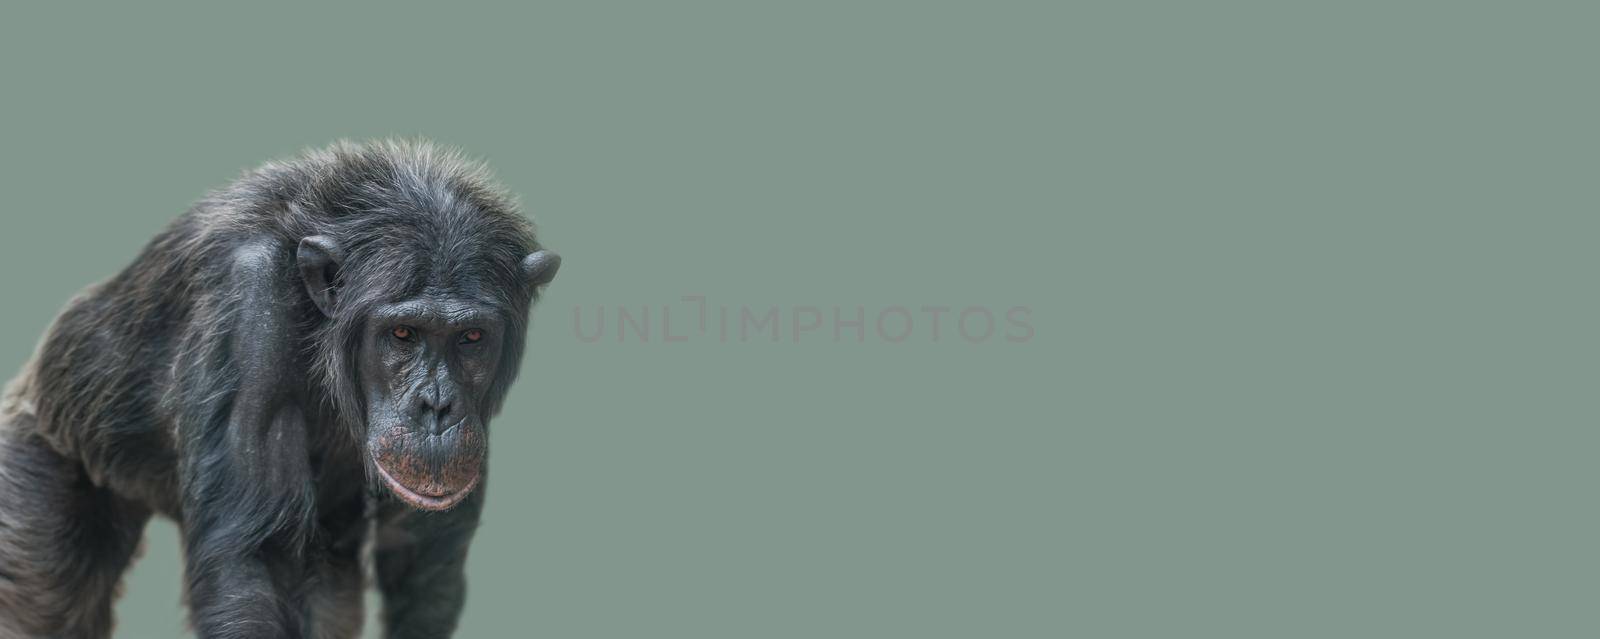 Banner with a walking old Chimpanzee portrait at solid light green background with copy space for text. Concept biodiversity and wildlife conservation. by neurobite